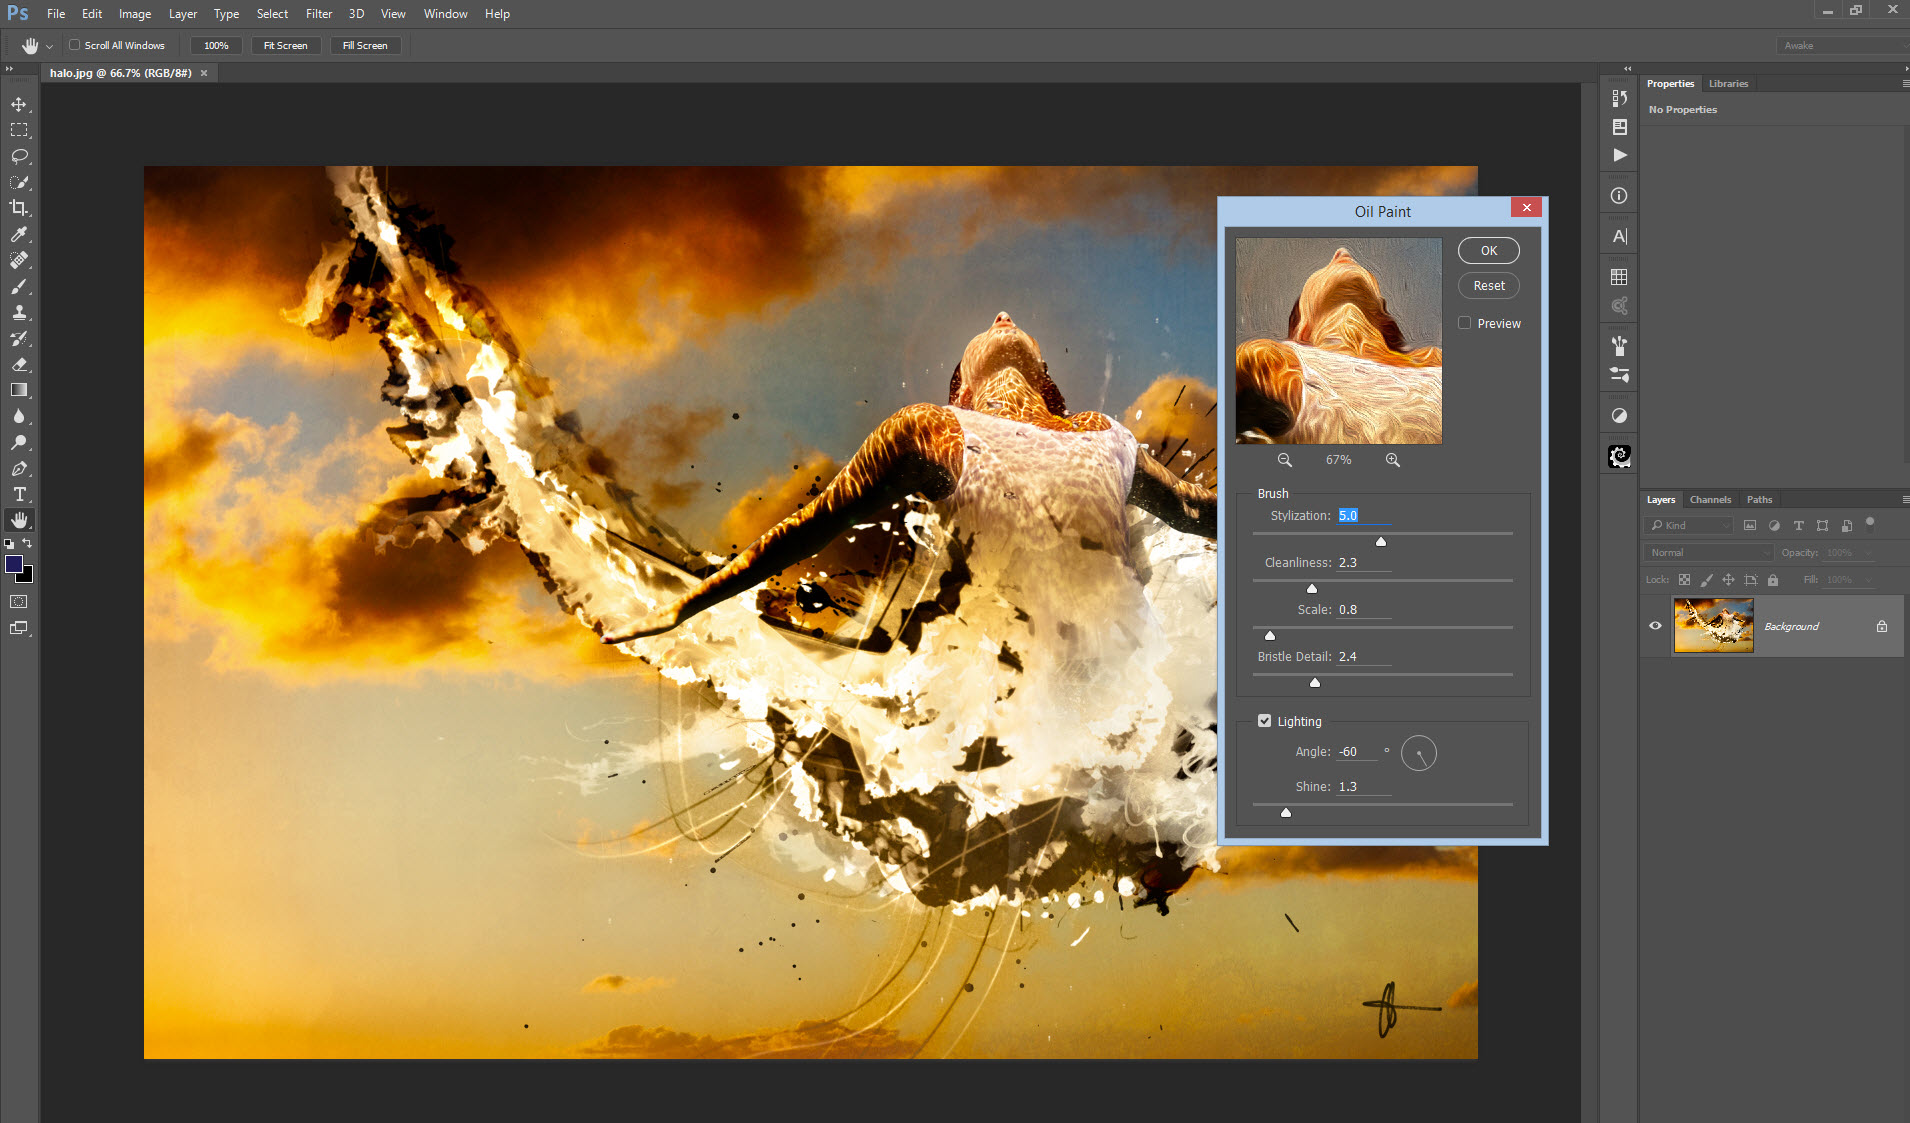 New in Photoshop CC 2015 November Release